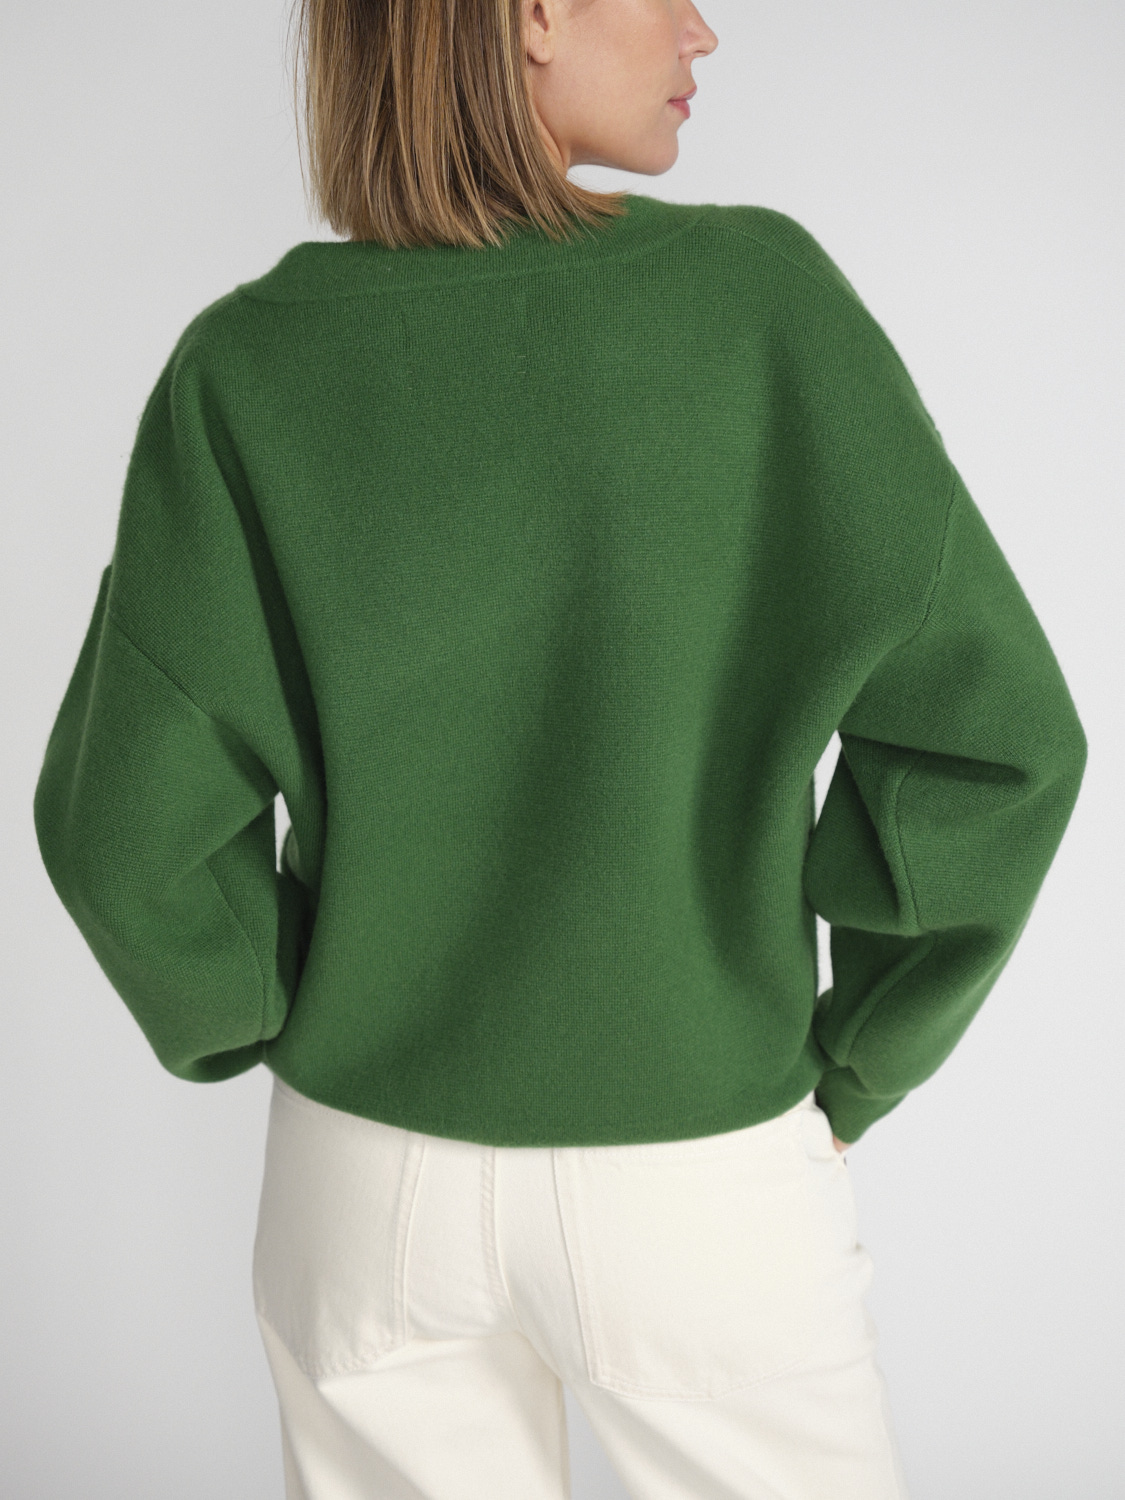 Extreme Cashmere N° 316 Lana - V-neck cashmere sweater  green One Size